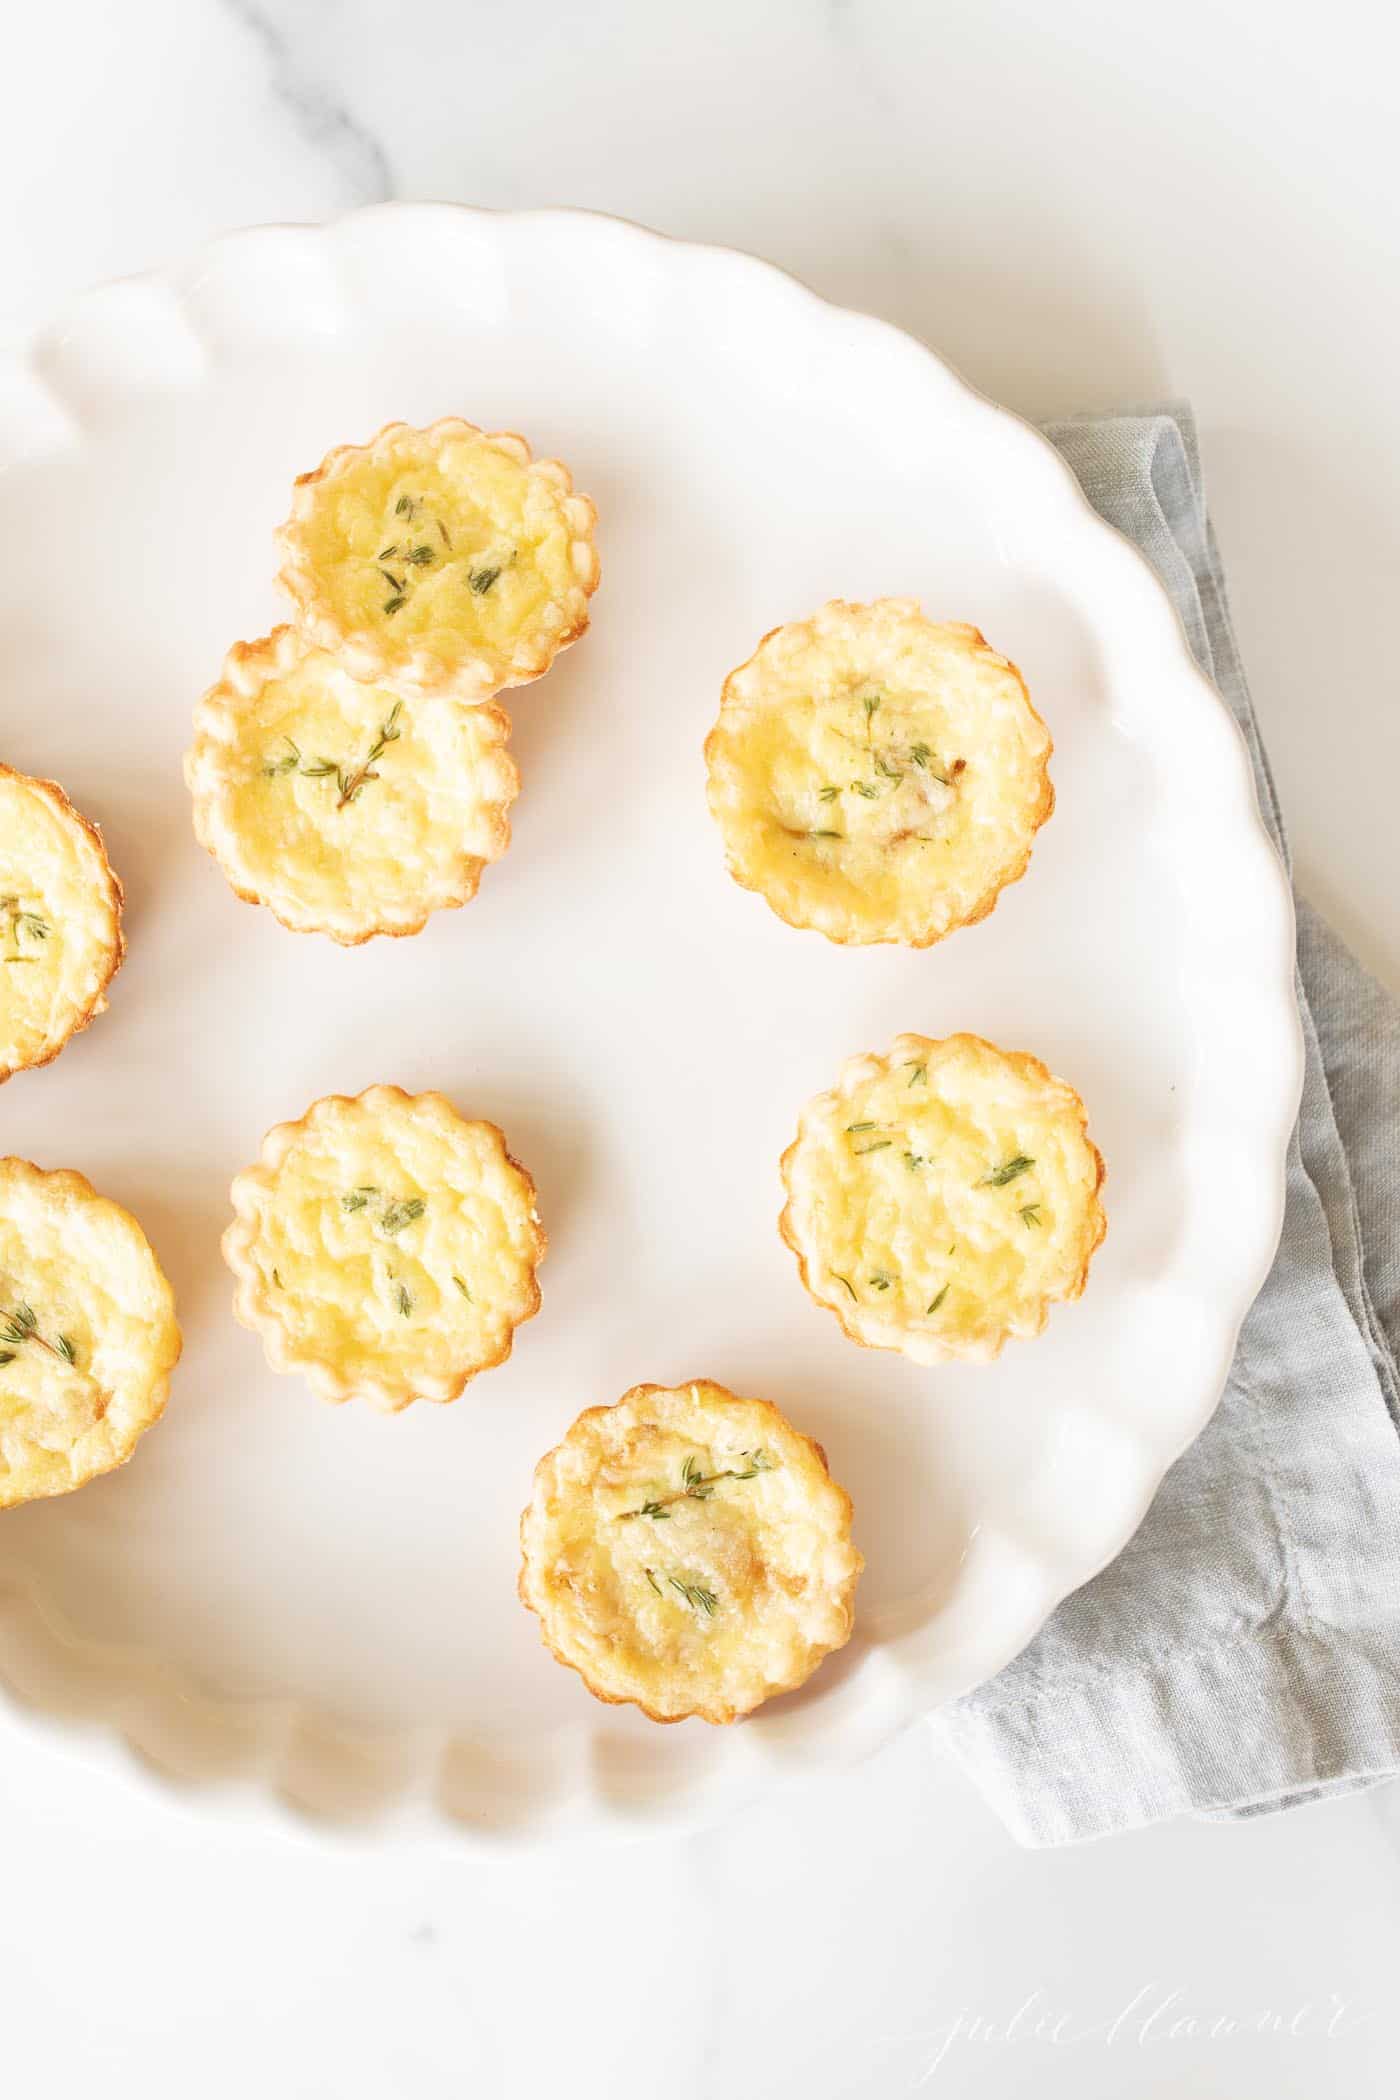 A white scalloped dish filled with small cheddar cheese tarts.